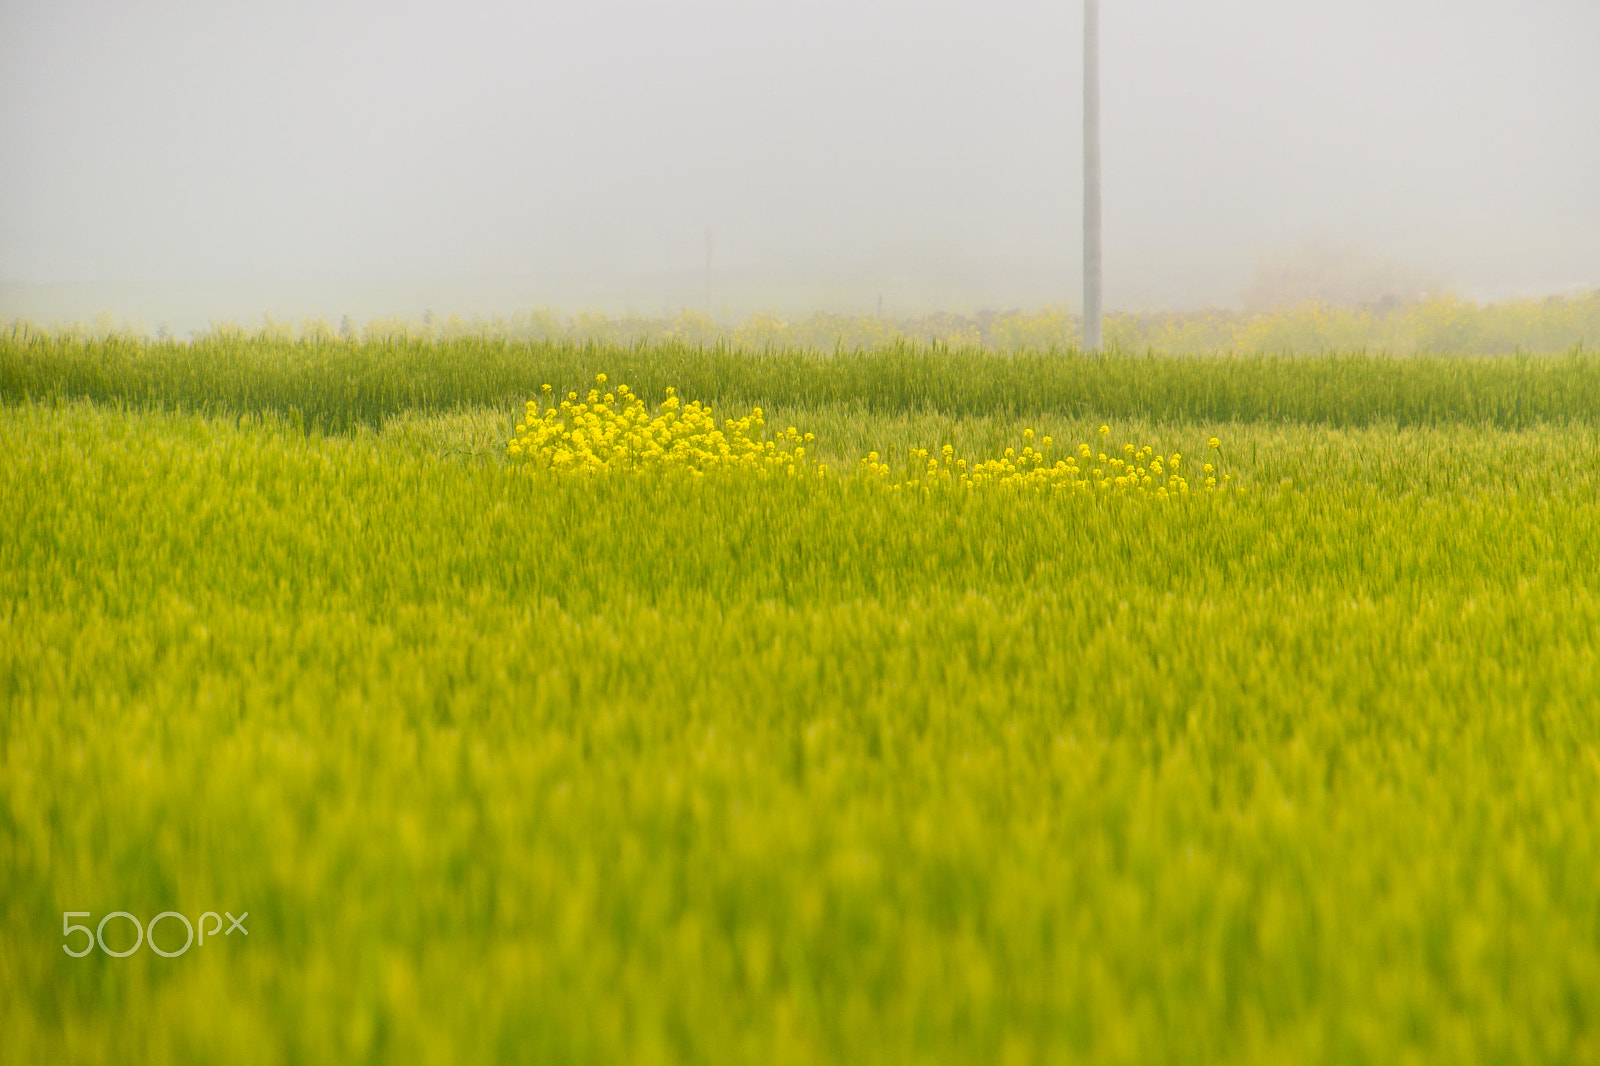 Nikon D5500 + Tamron 16-300mm F3.5-6.3 Di II VC PZD Macro sample photo. On a field of barley in a foggy april home photography